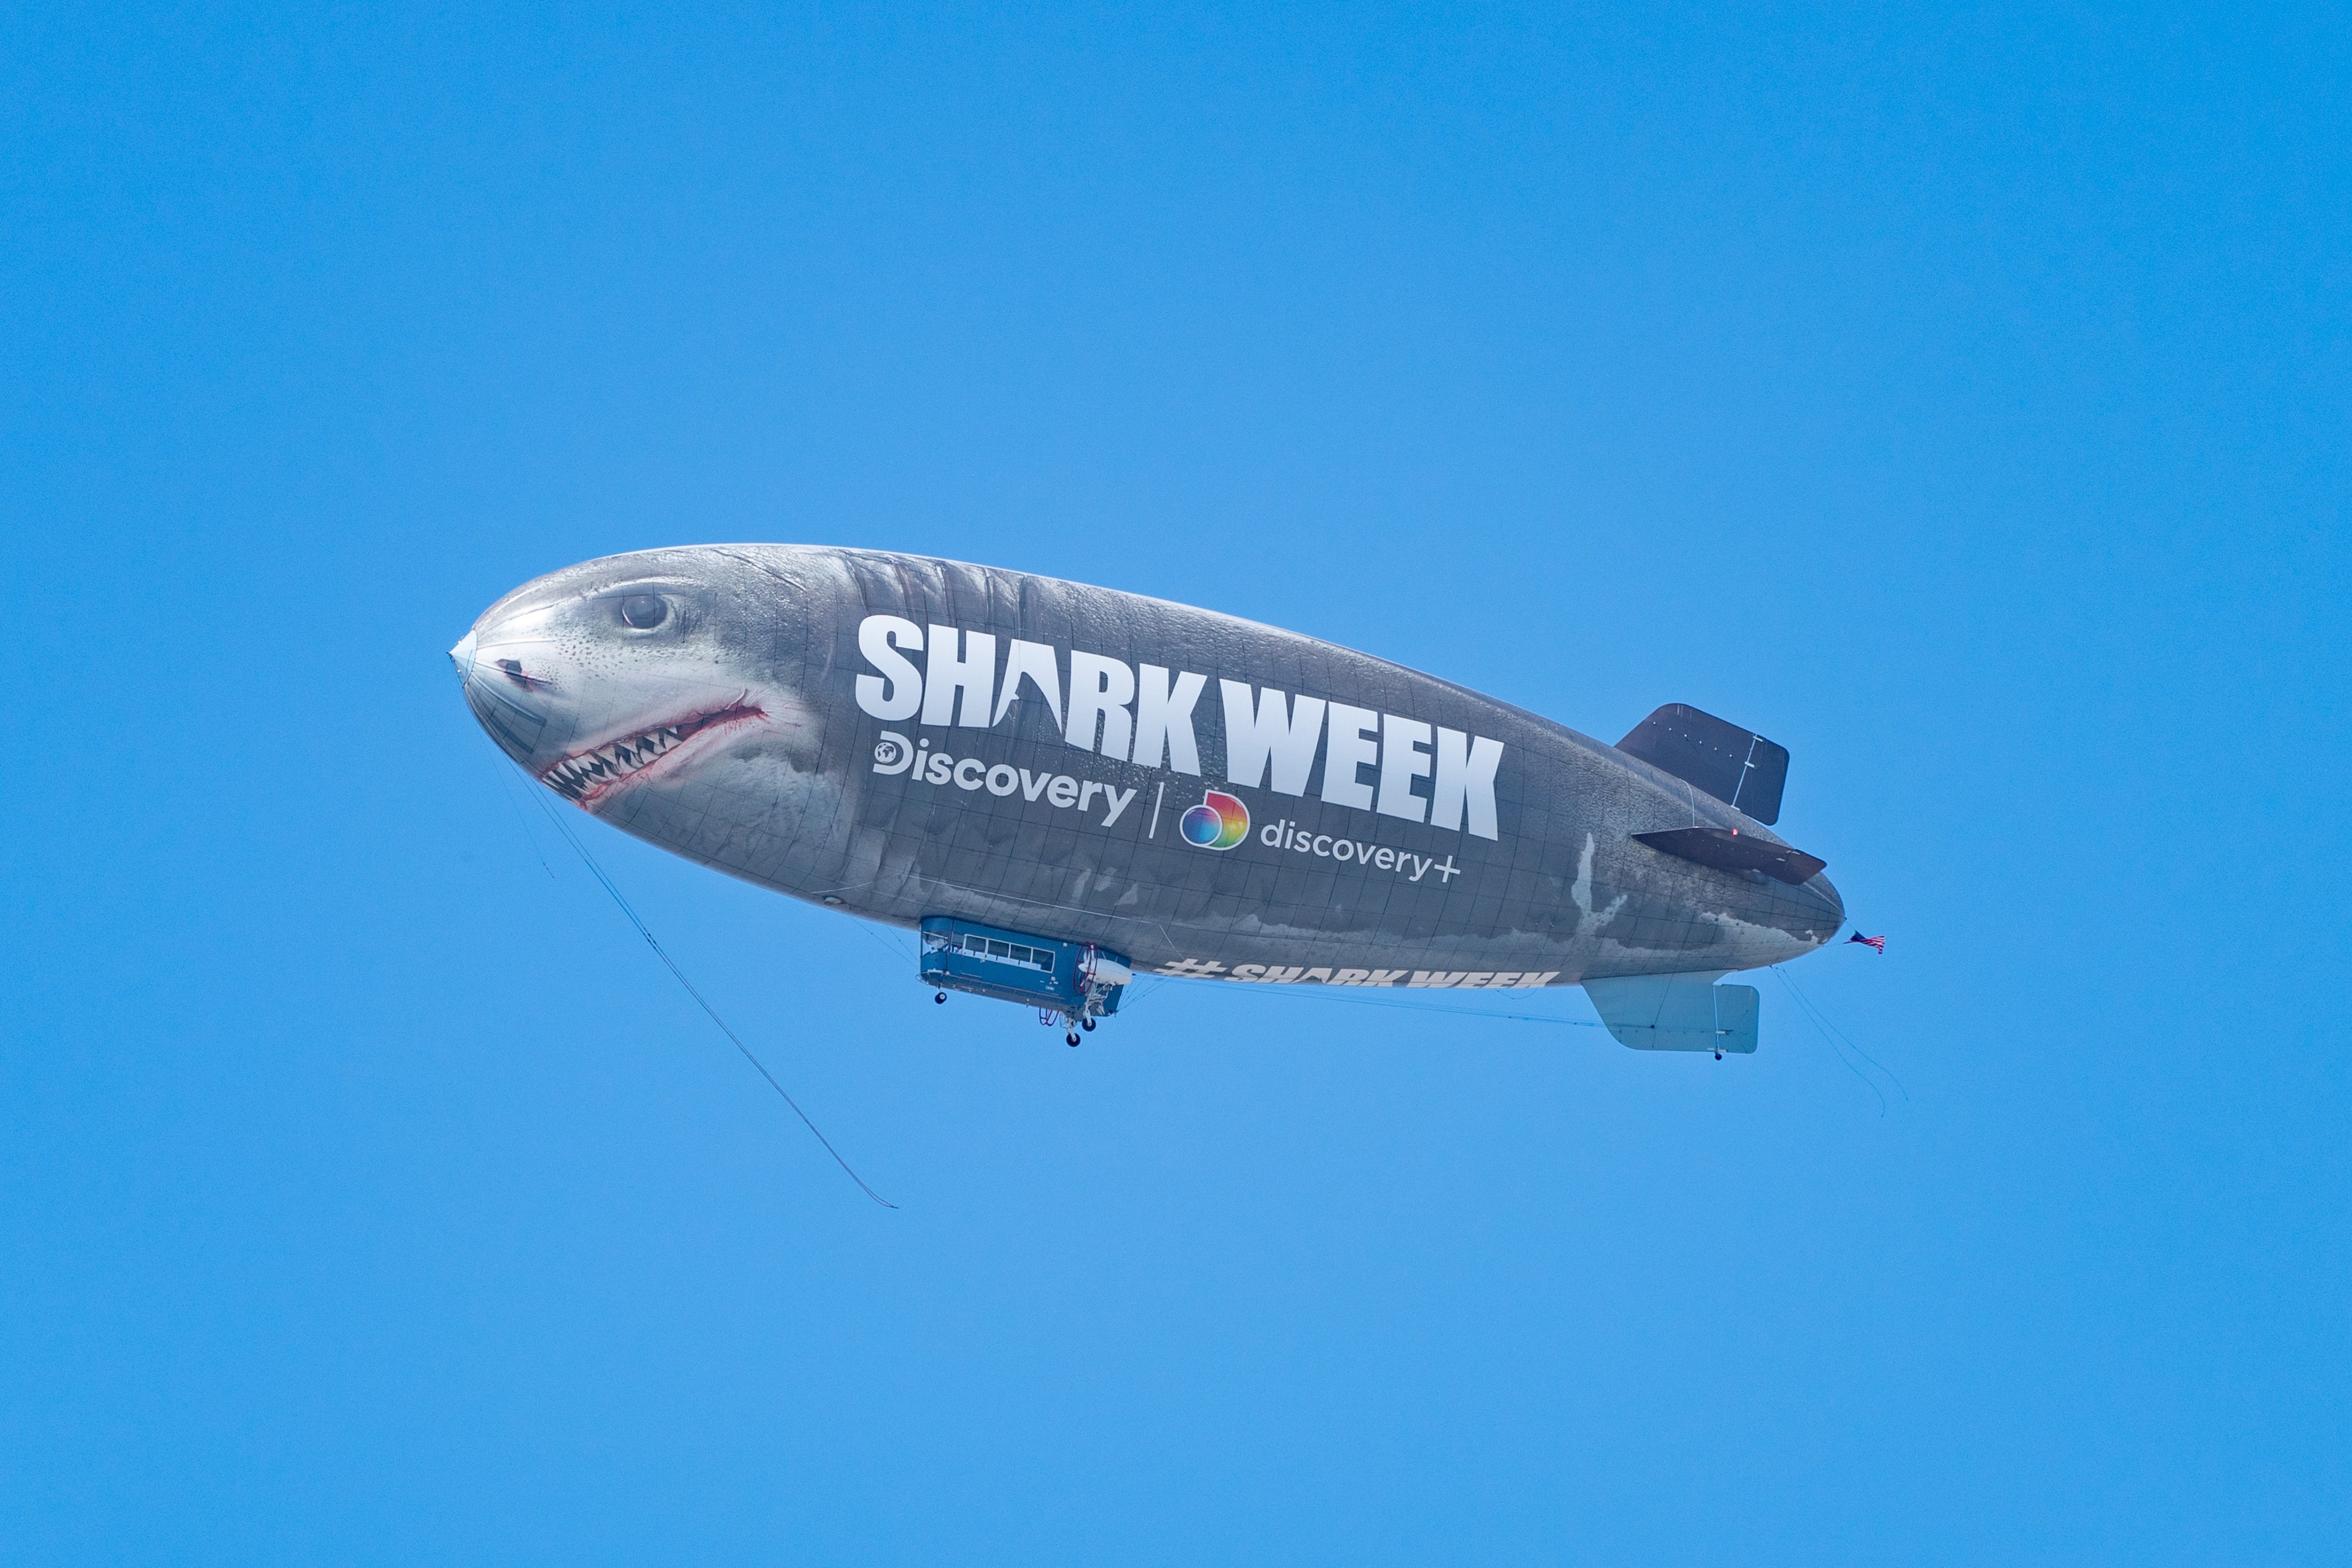 A new streaming service will combine HBO Max and Discover+. In featuring both "Shark Week" and "Game of Thrones," it hopes to devour its competition. (AaronP/Bauer-Griffin/GC Images)